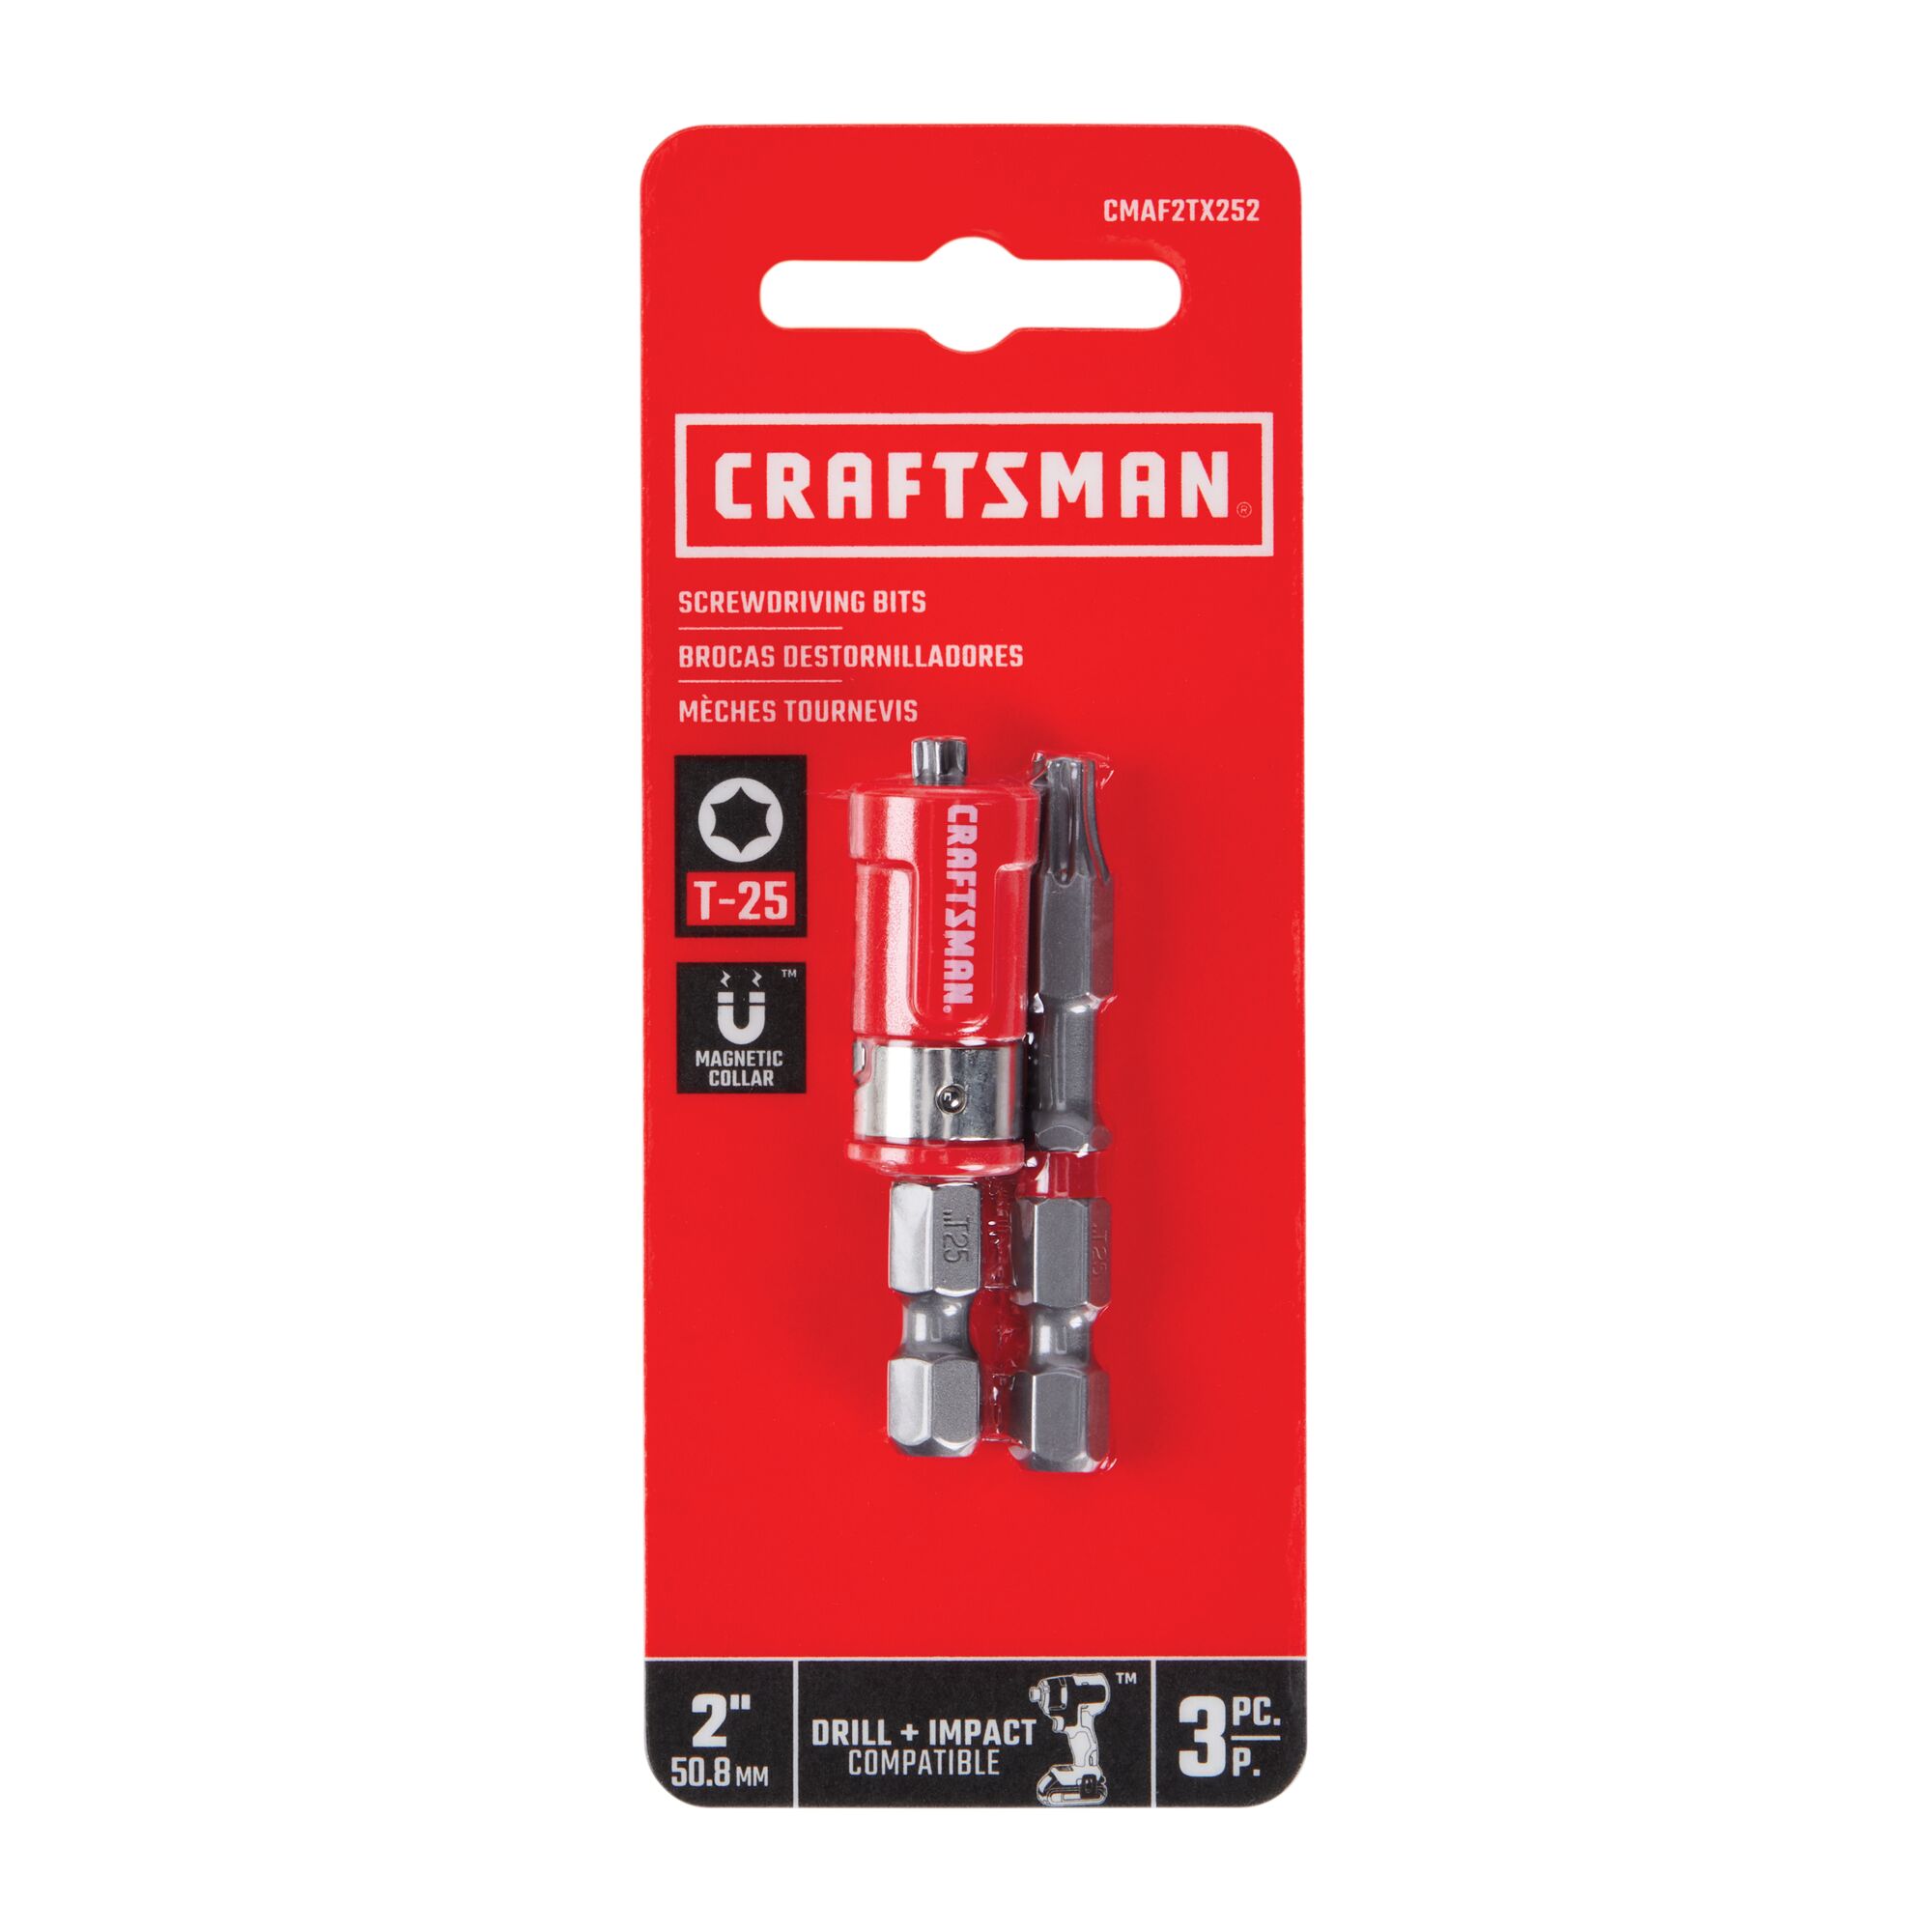 2 inch Number 2 Square or Robertson High carbon Steel Hex Shank Screwdriver Bit 2 piece in carded packaging.